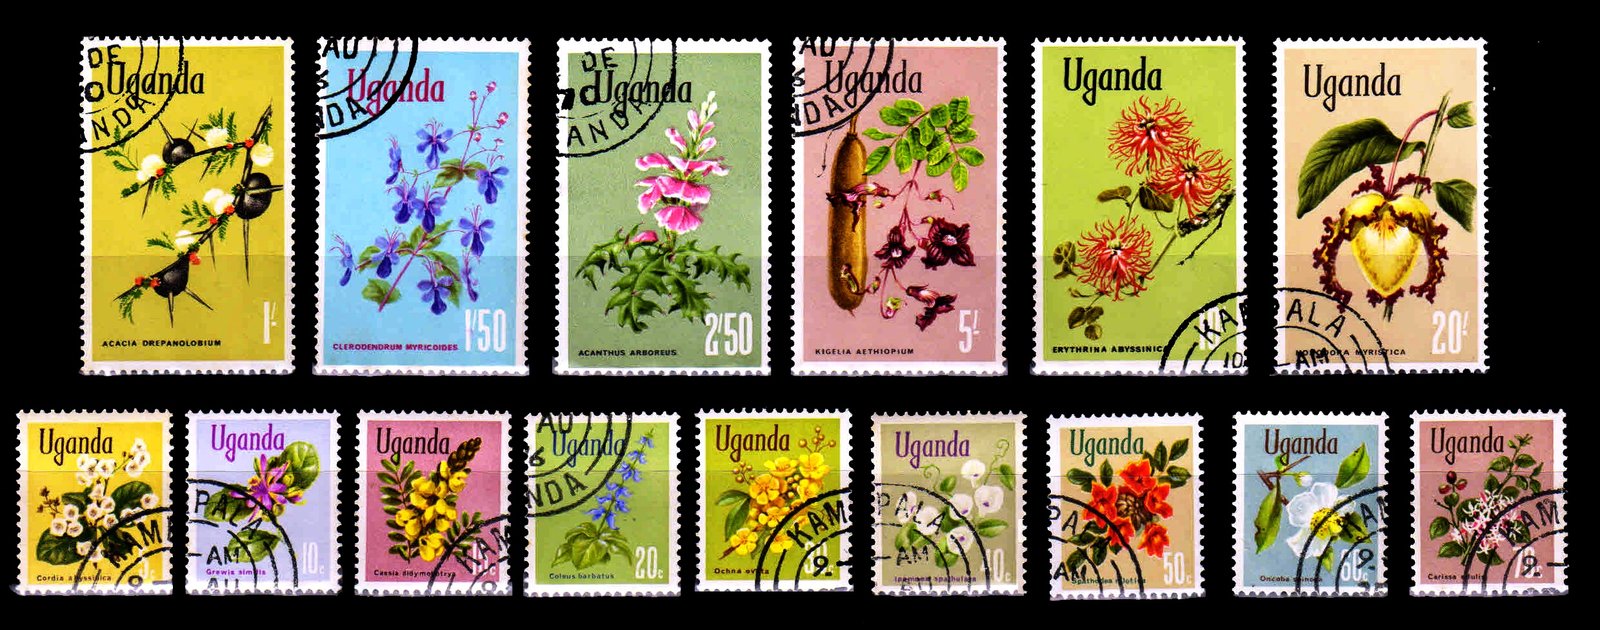 UGANDA 1969 - Flowers, Complete Set of 15, Used Stamps. S.G. 131a-145. Cat £ 13